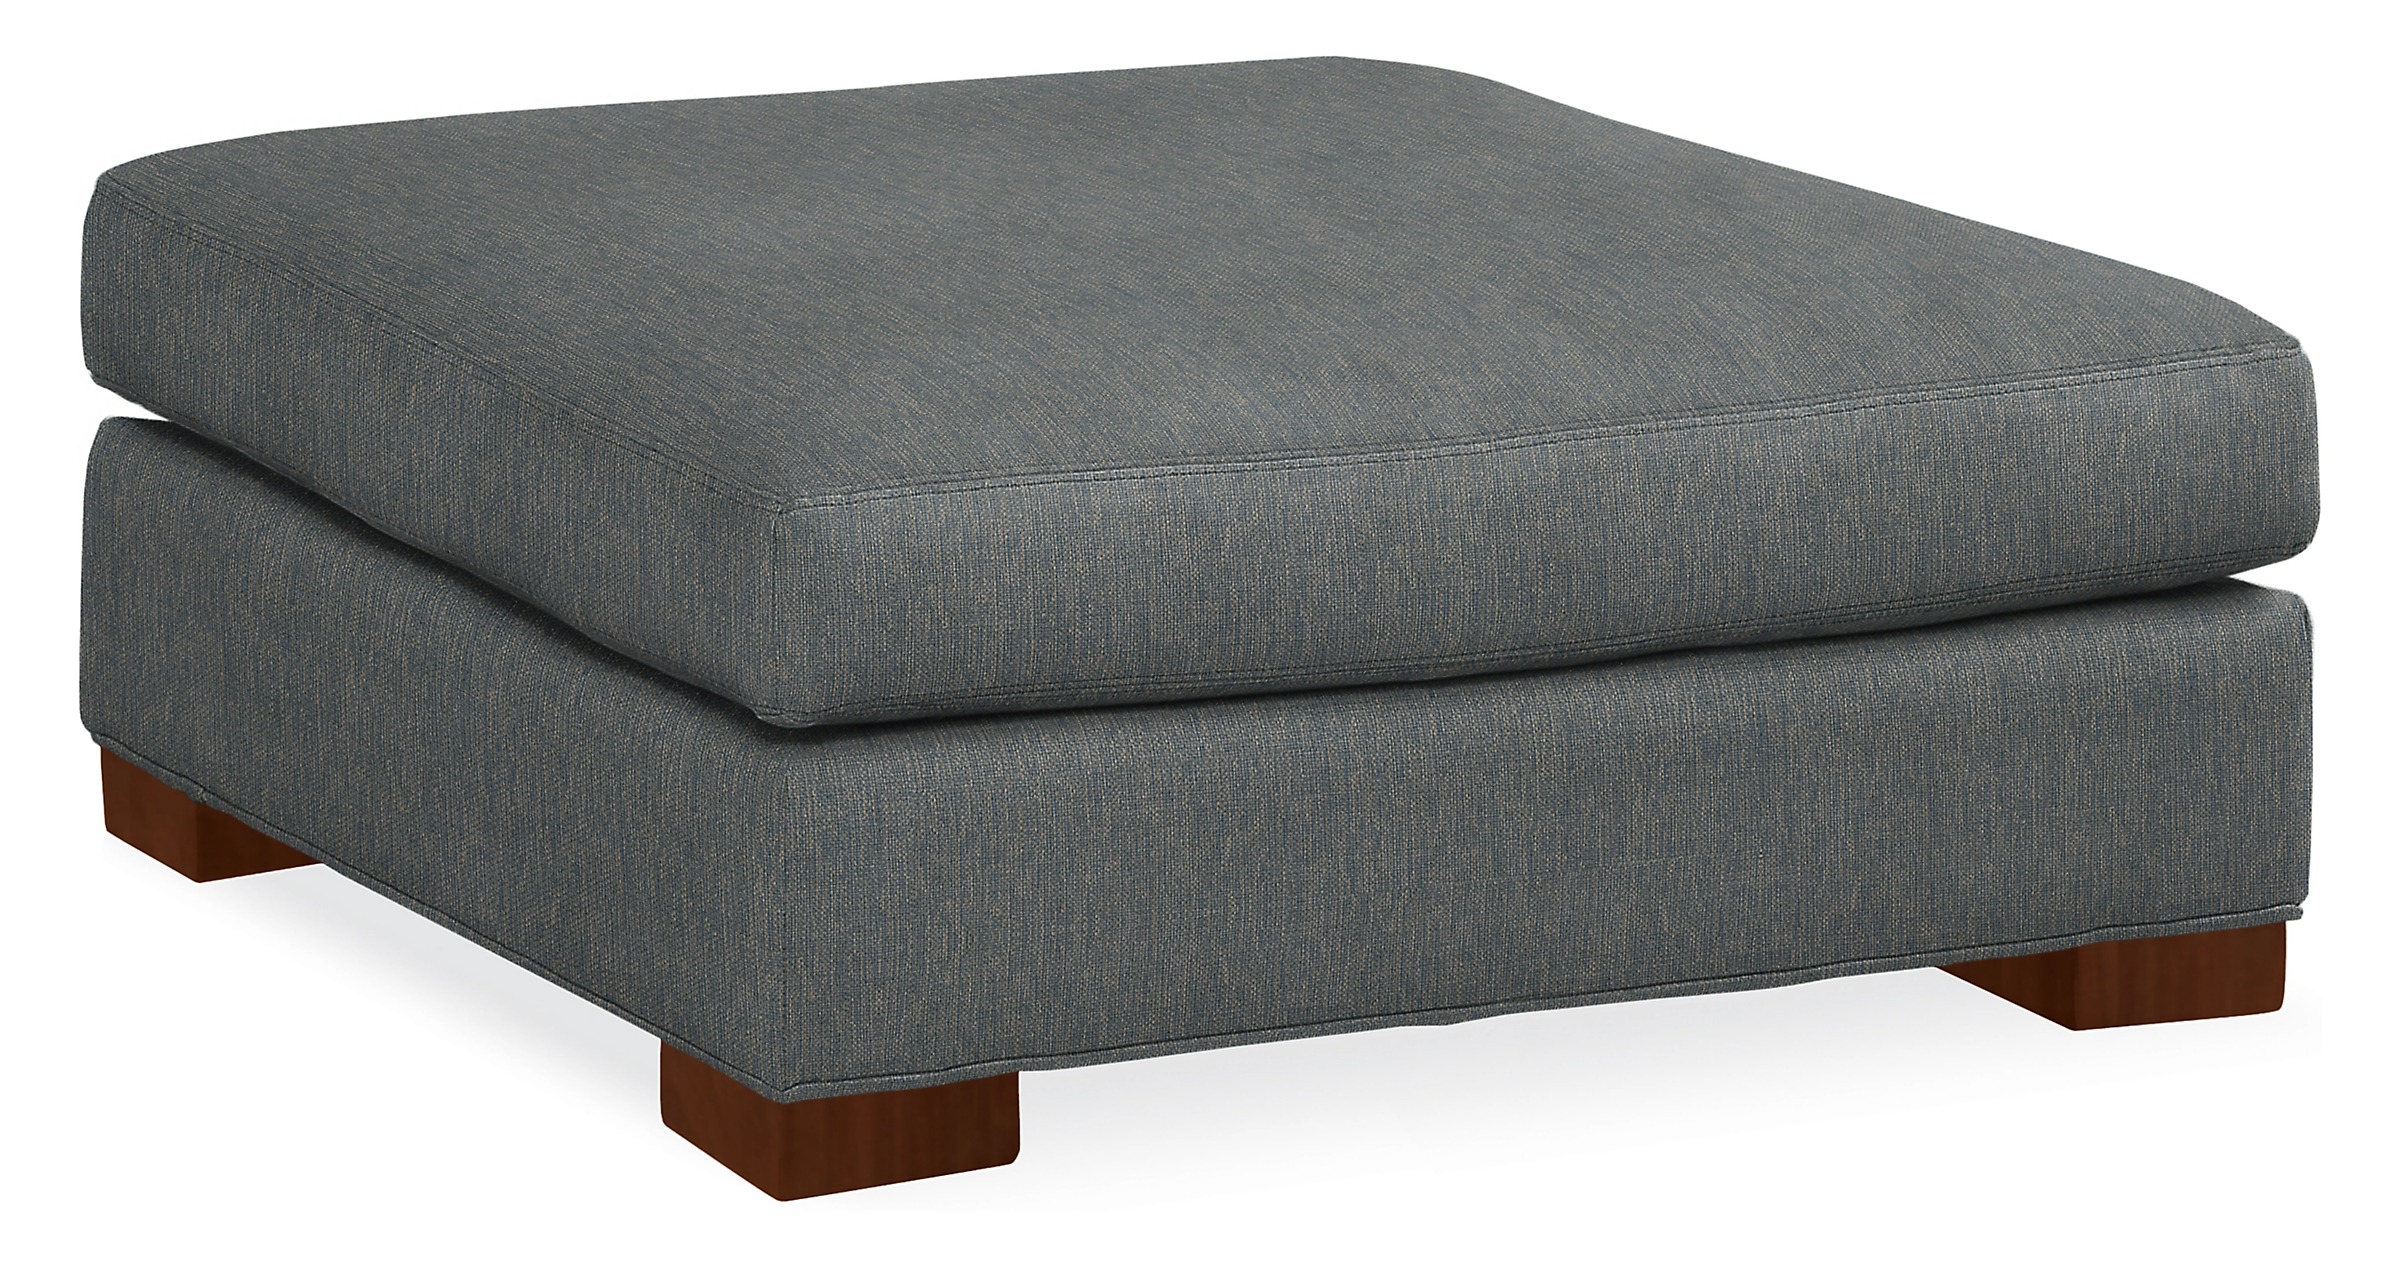 Metro 38w 38d 17h Square Ottoman in Sumner Cadet with Mocha Legs